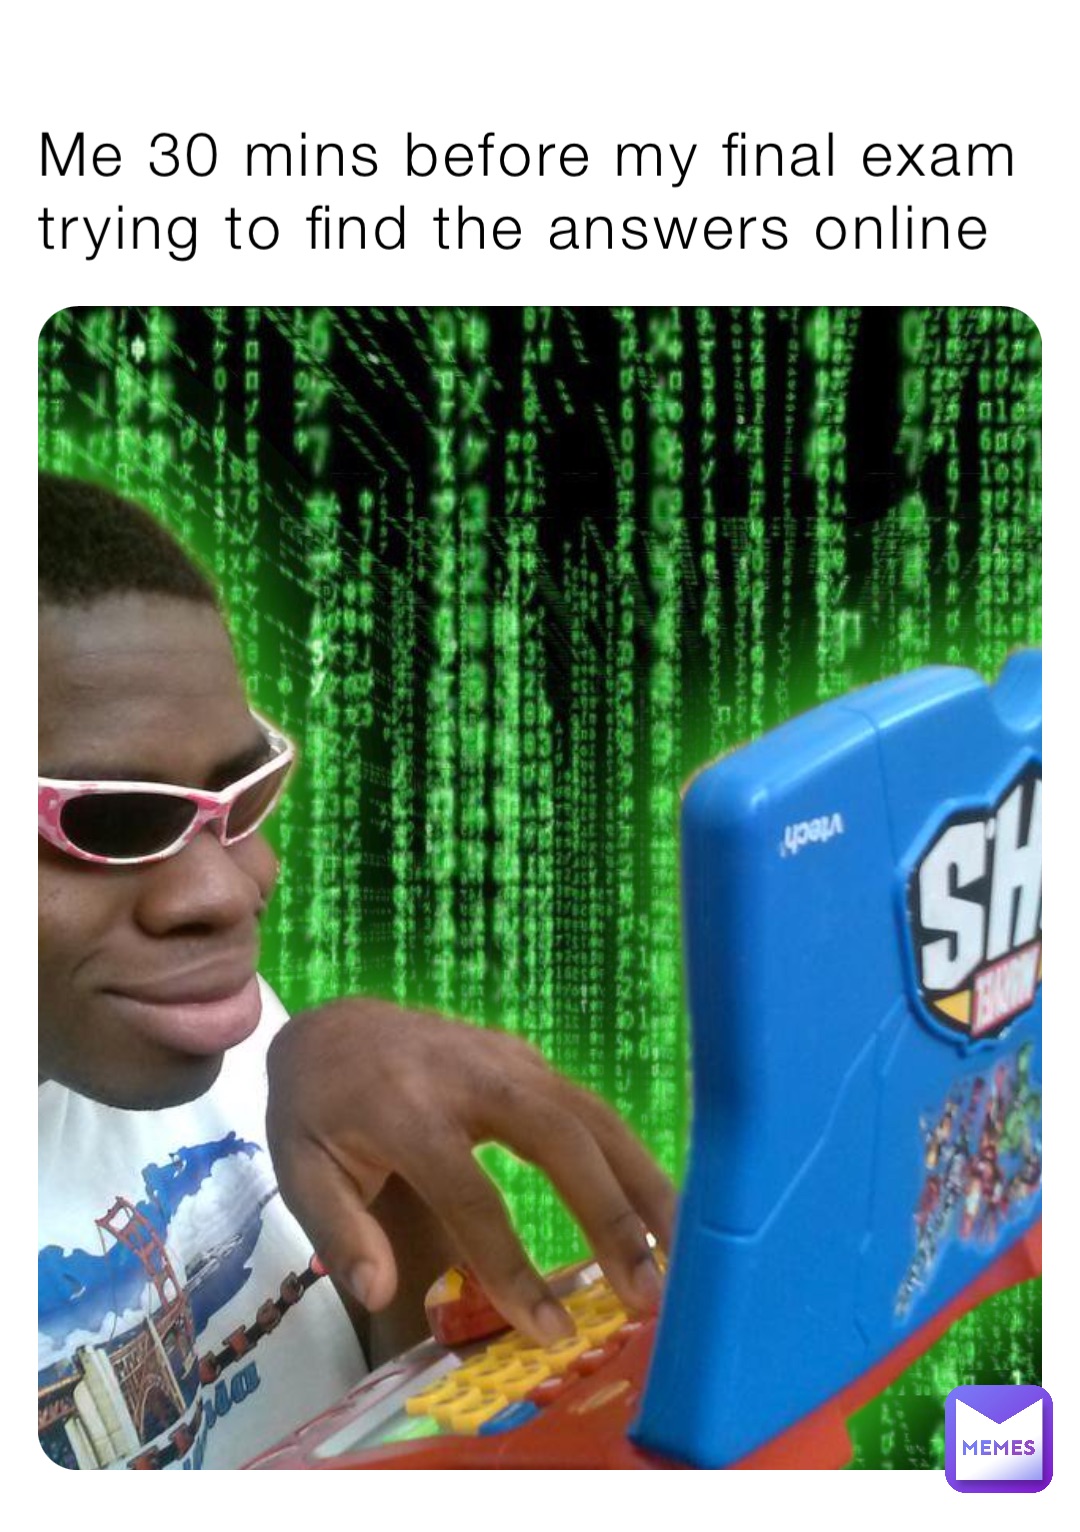 Me 30 mins before my final exam trying to find the answers online